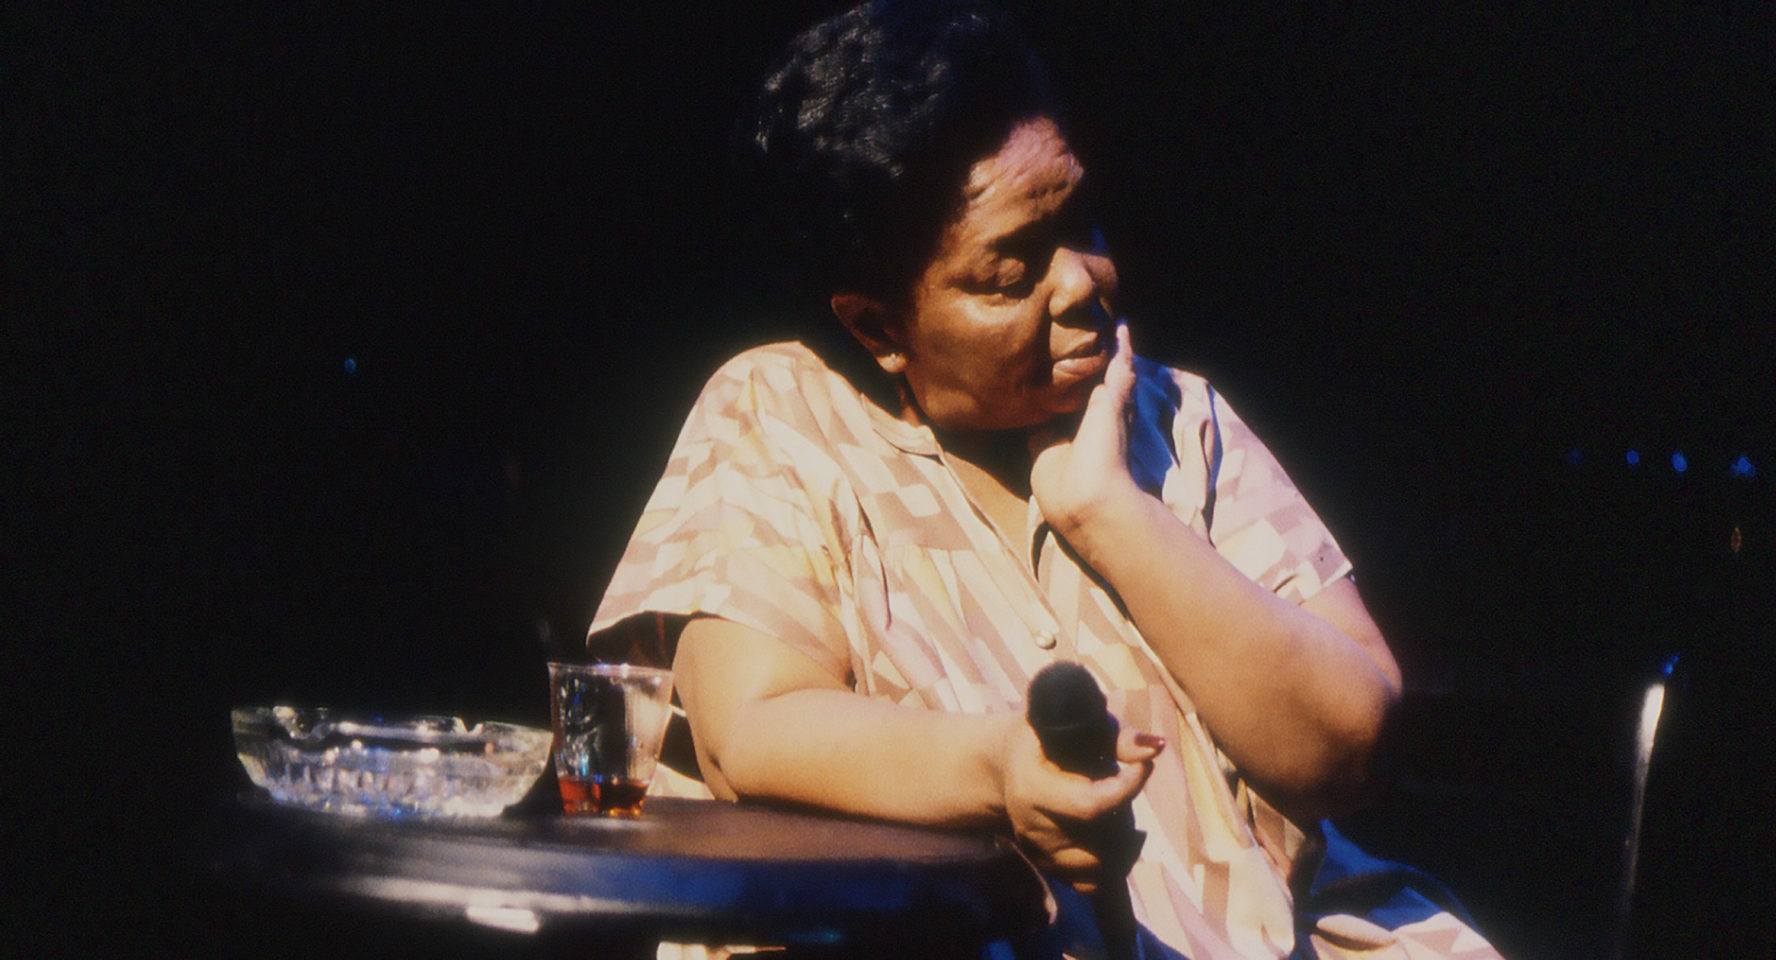 A woman sitting down holds a microphone and looks off to her left.